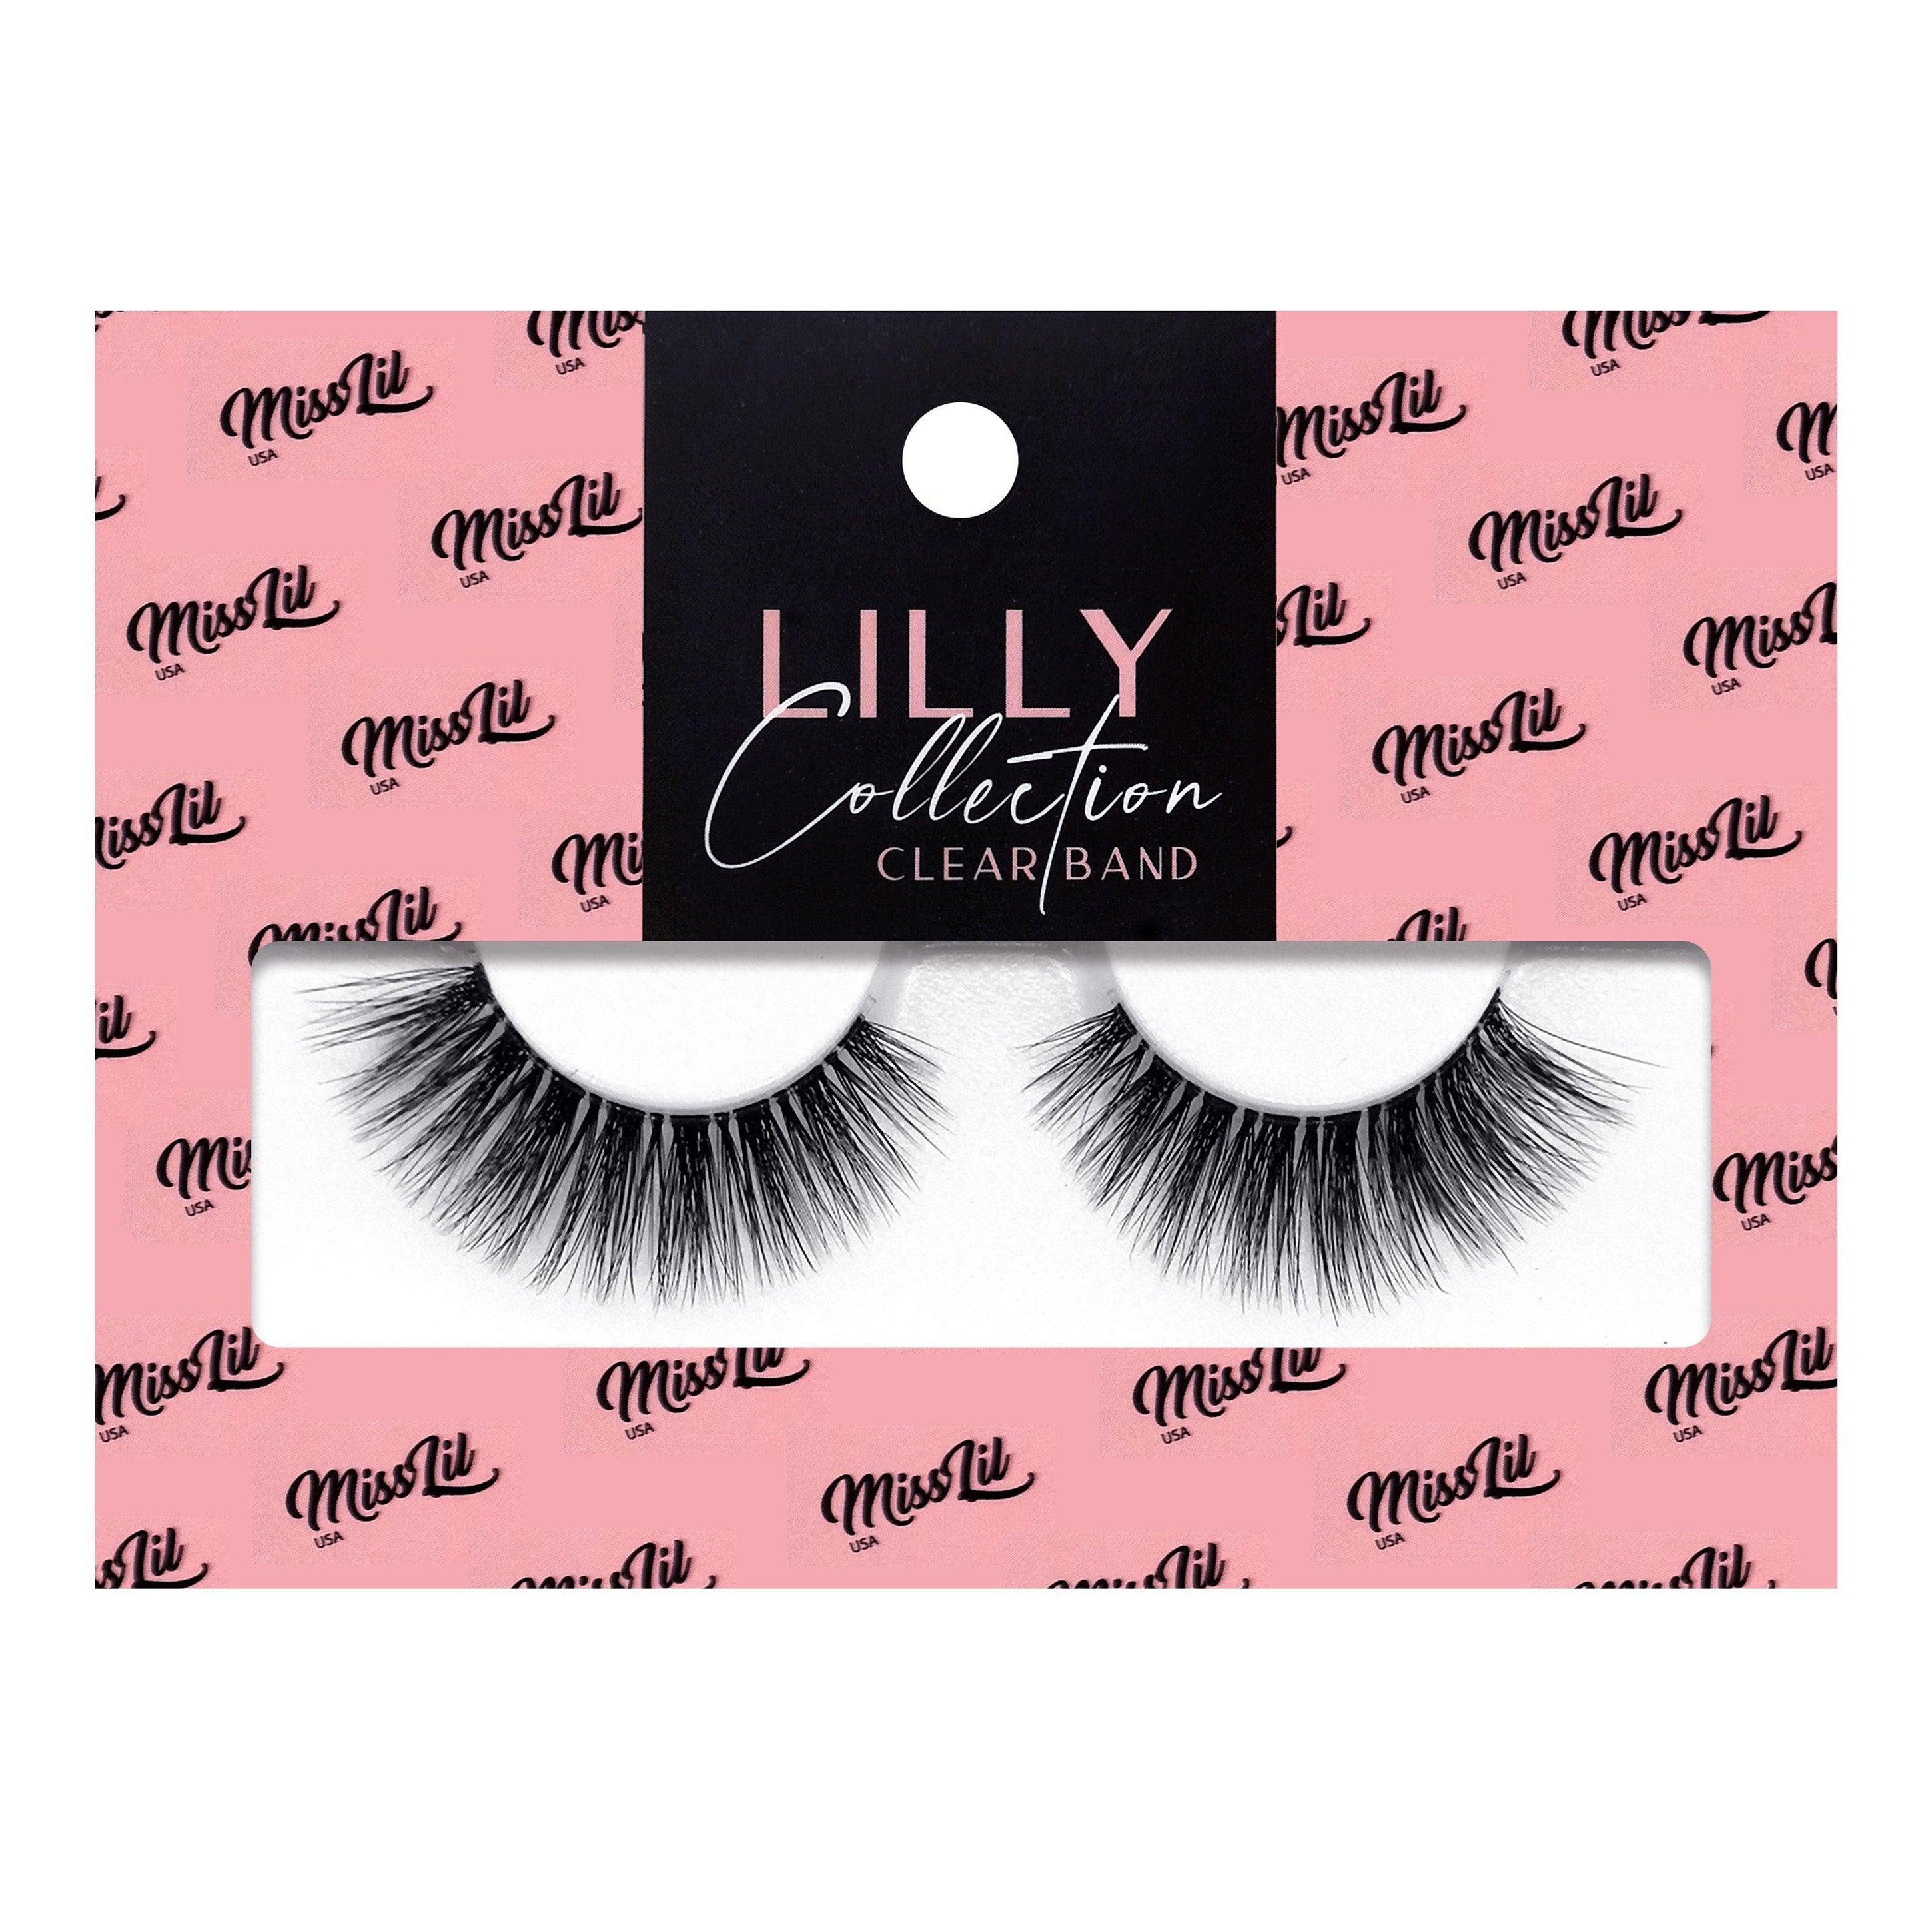 1-Pair Lashes-Lilly Collection #9 (Pack of 12) - Miss Lil USA Wholesale